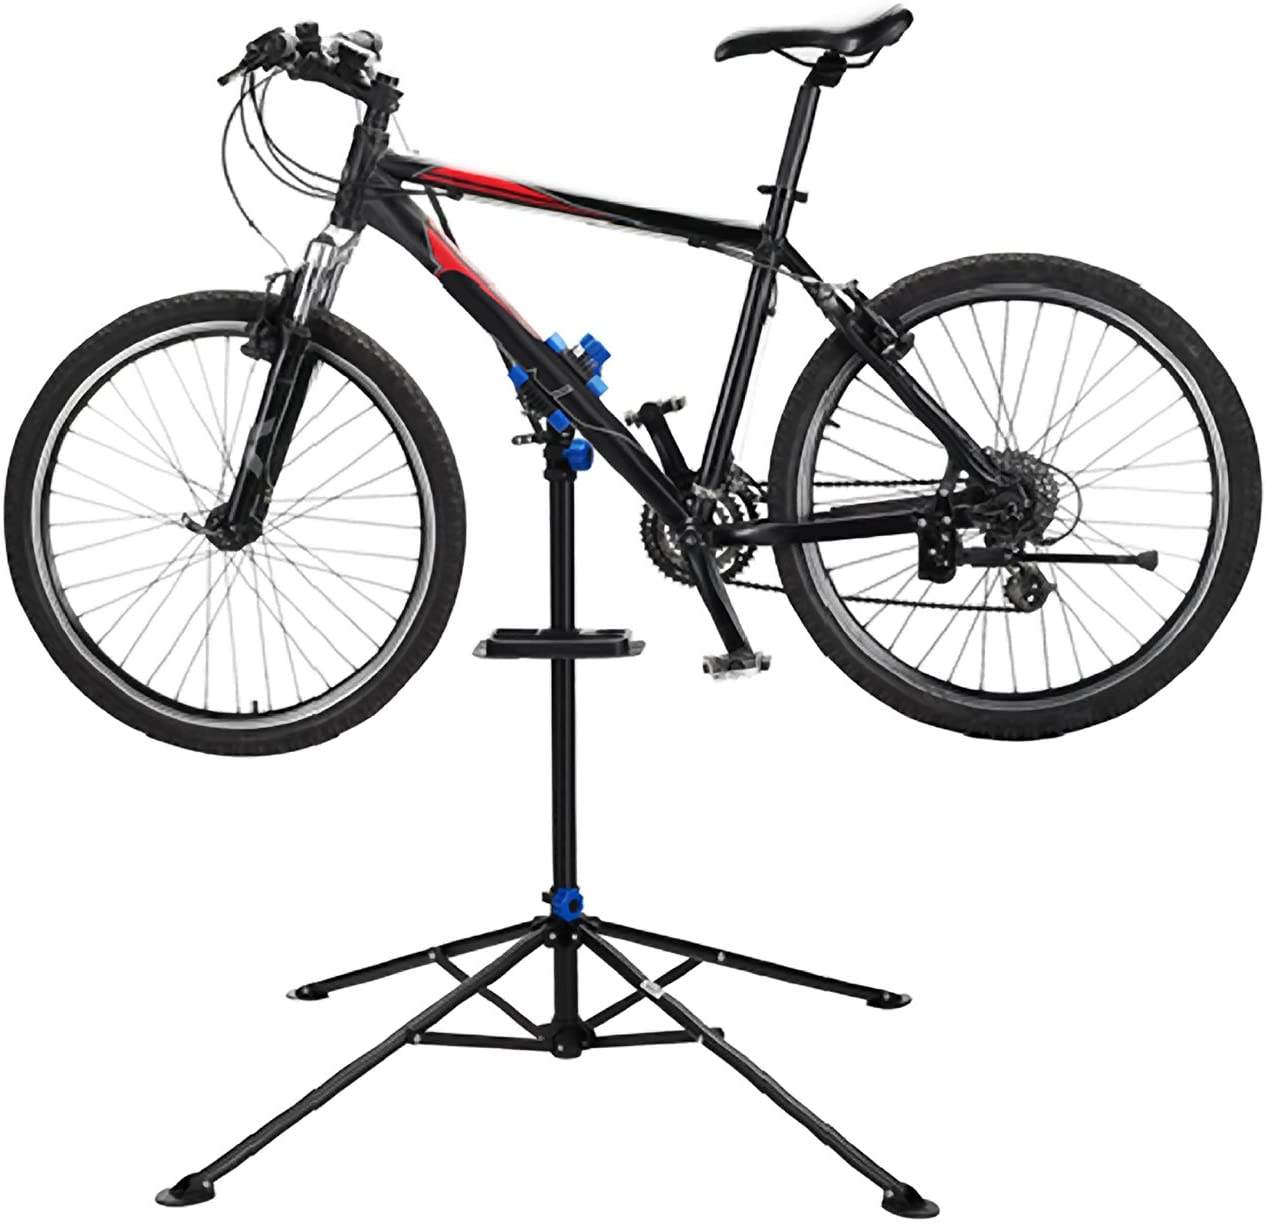 Positioning your bike on a repair stand will make it much easier to get to the chain and tighten a mountain bike chain.